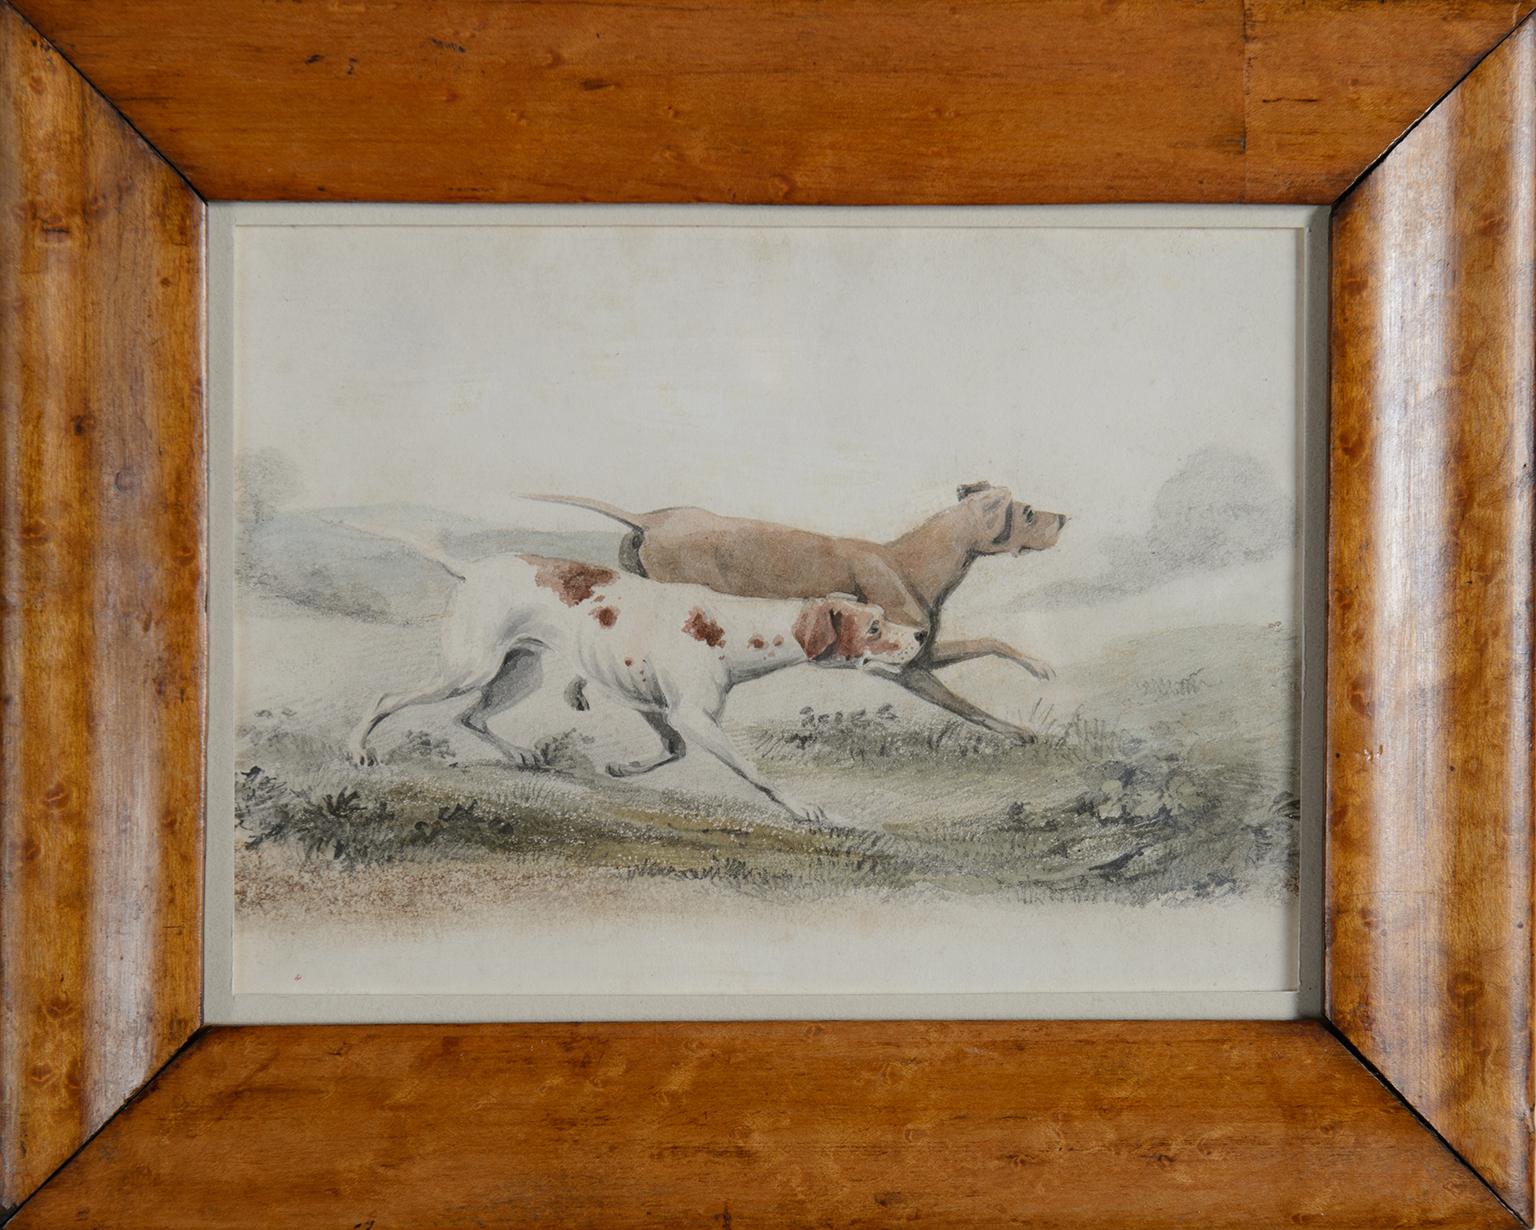 Two Pointers in a Landscape - 19th century watercolour of dogs - Art by Unknown